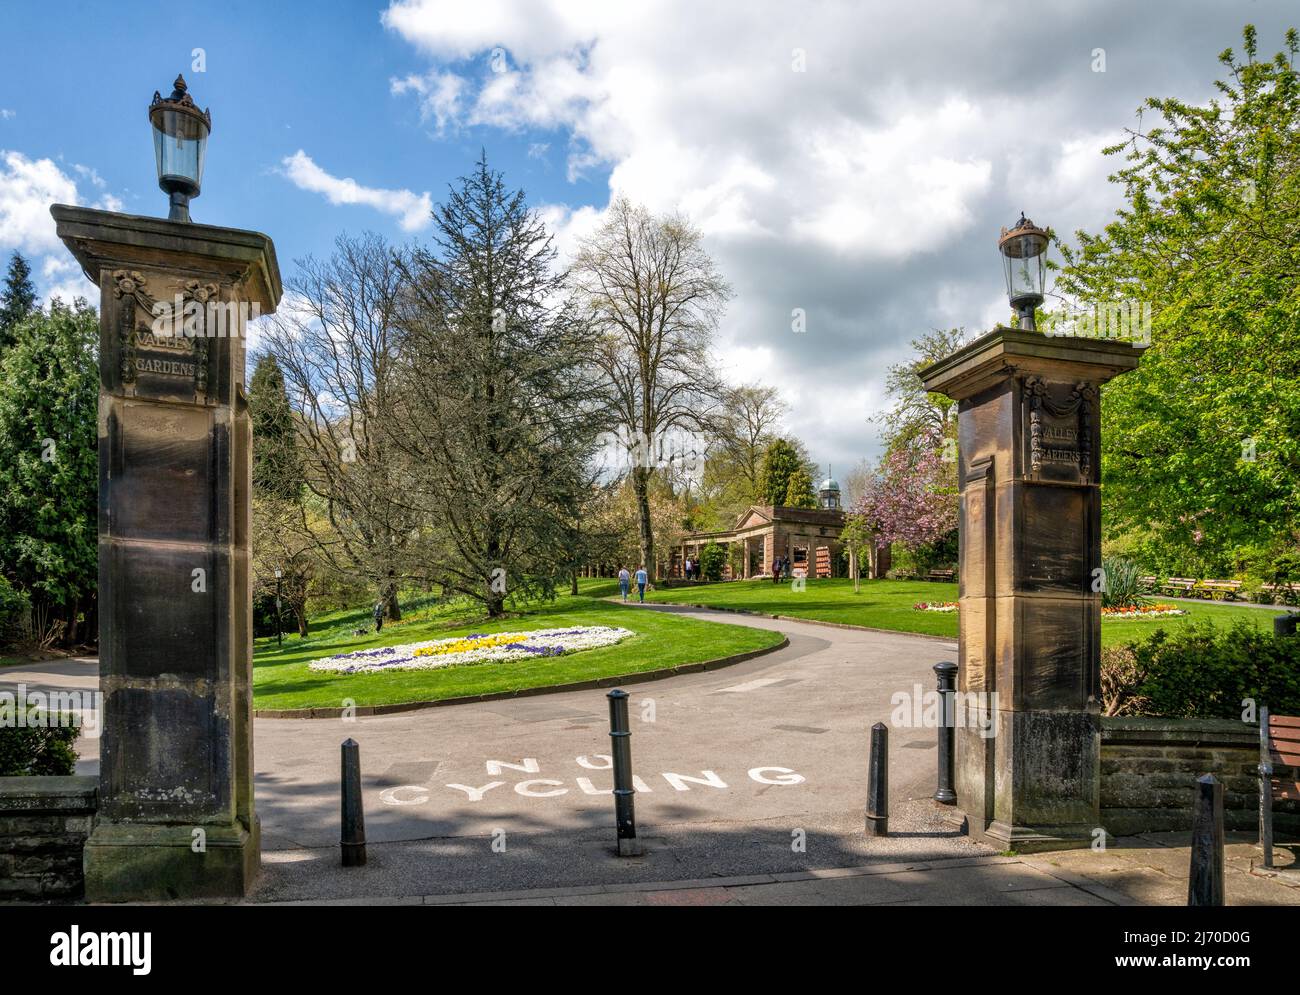 Entrance to Valley Gardens in Harrogate, North Yorkshire, United Kingdom Stock Photo